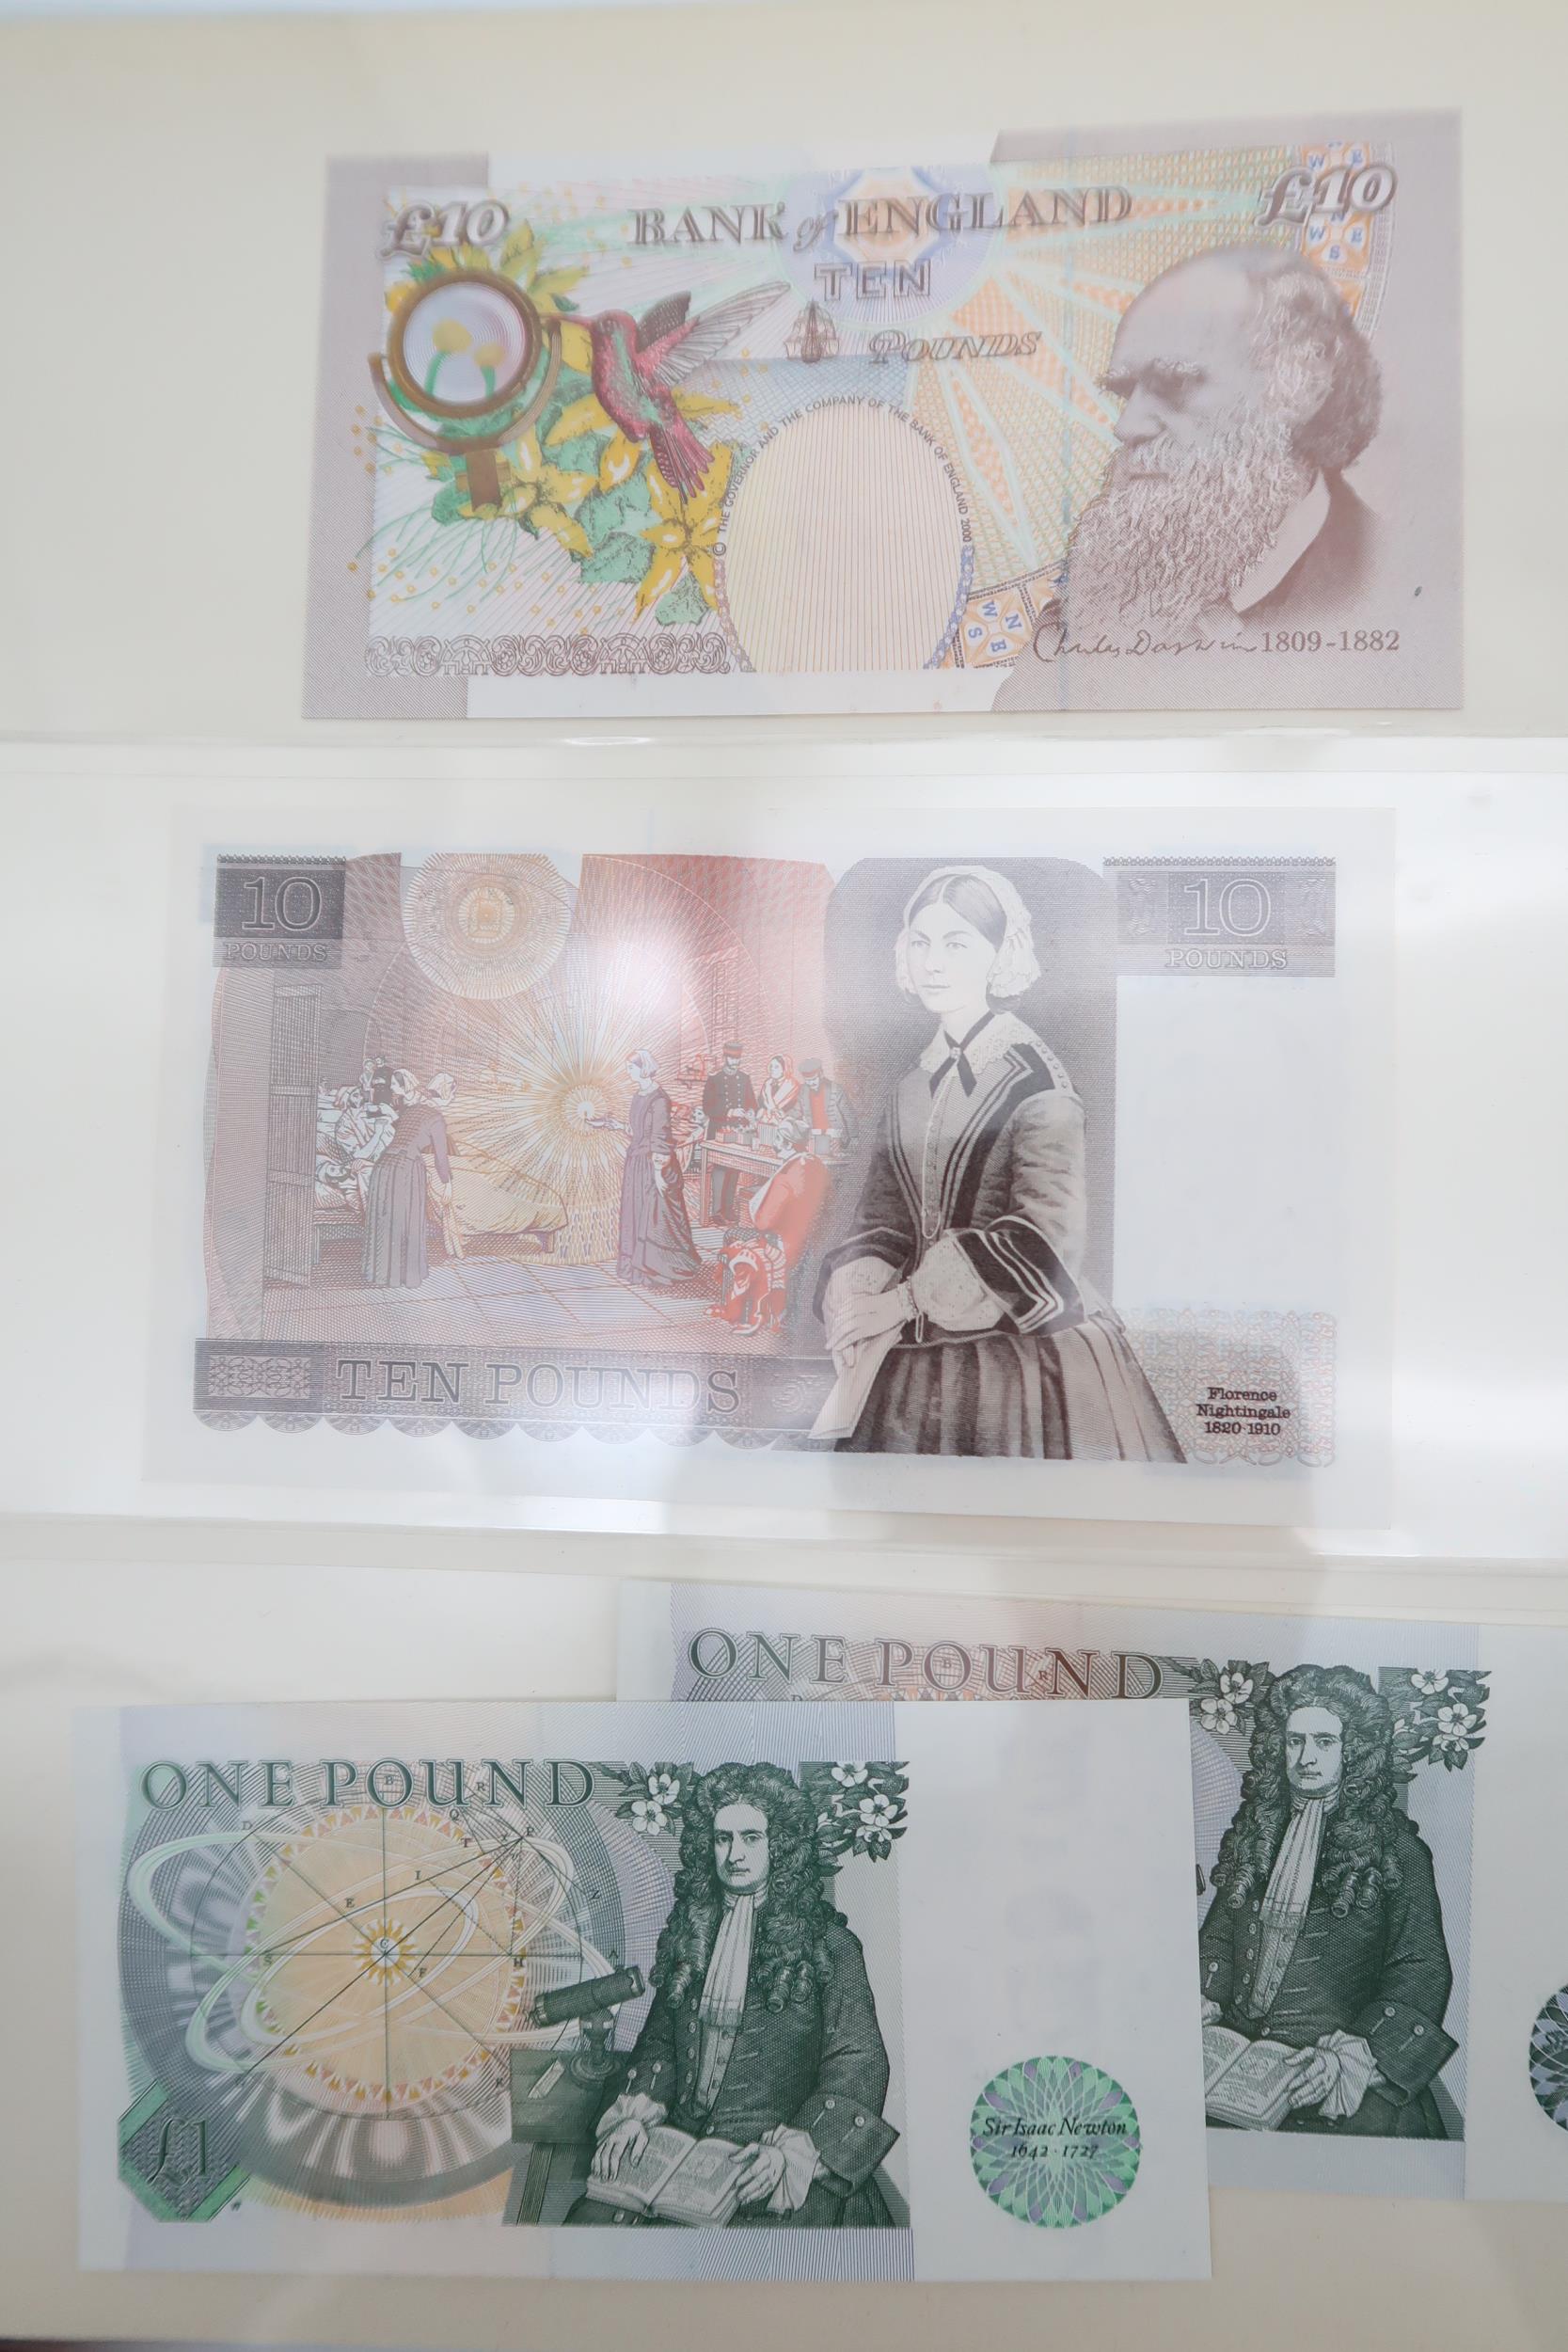 A collection of Great Britain and worldwide banknotes with The Bank of England, The Royal Bank of - Image 7 of 14